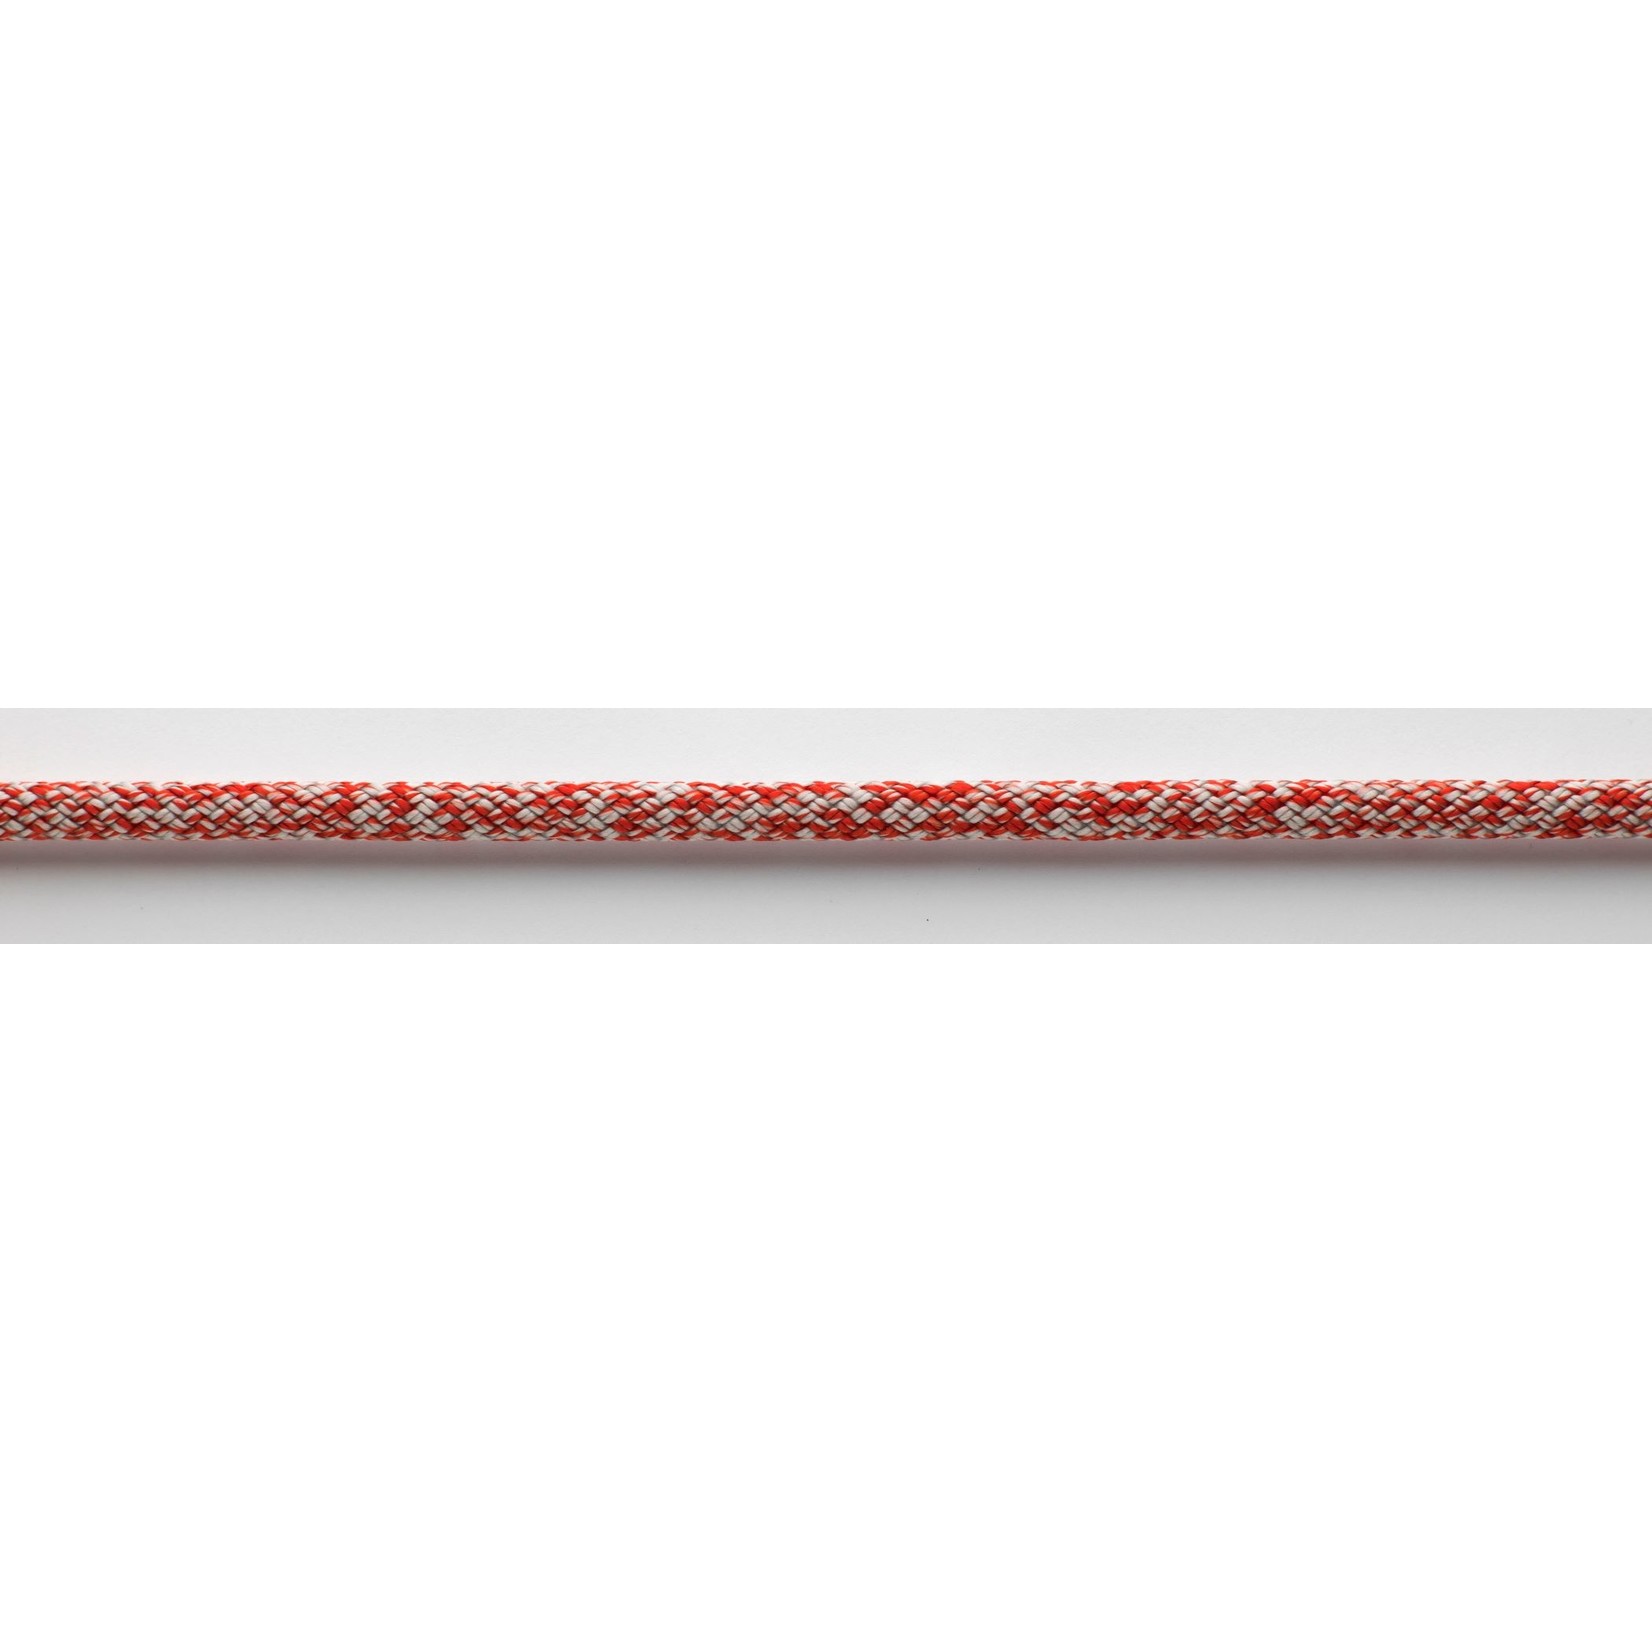 U-Rope Offshore 4mm. red